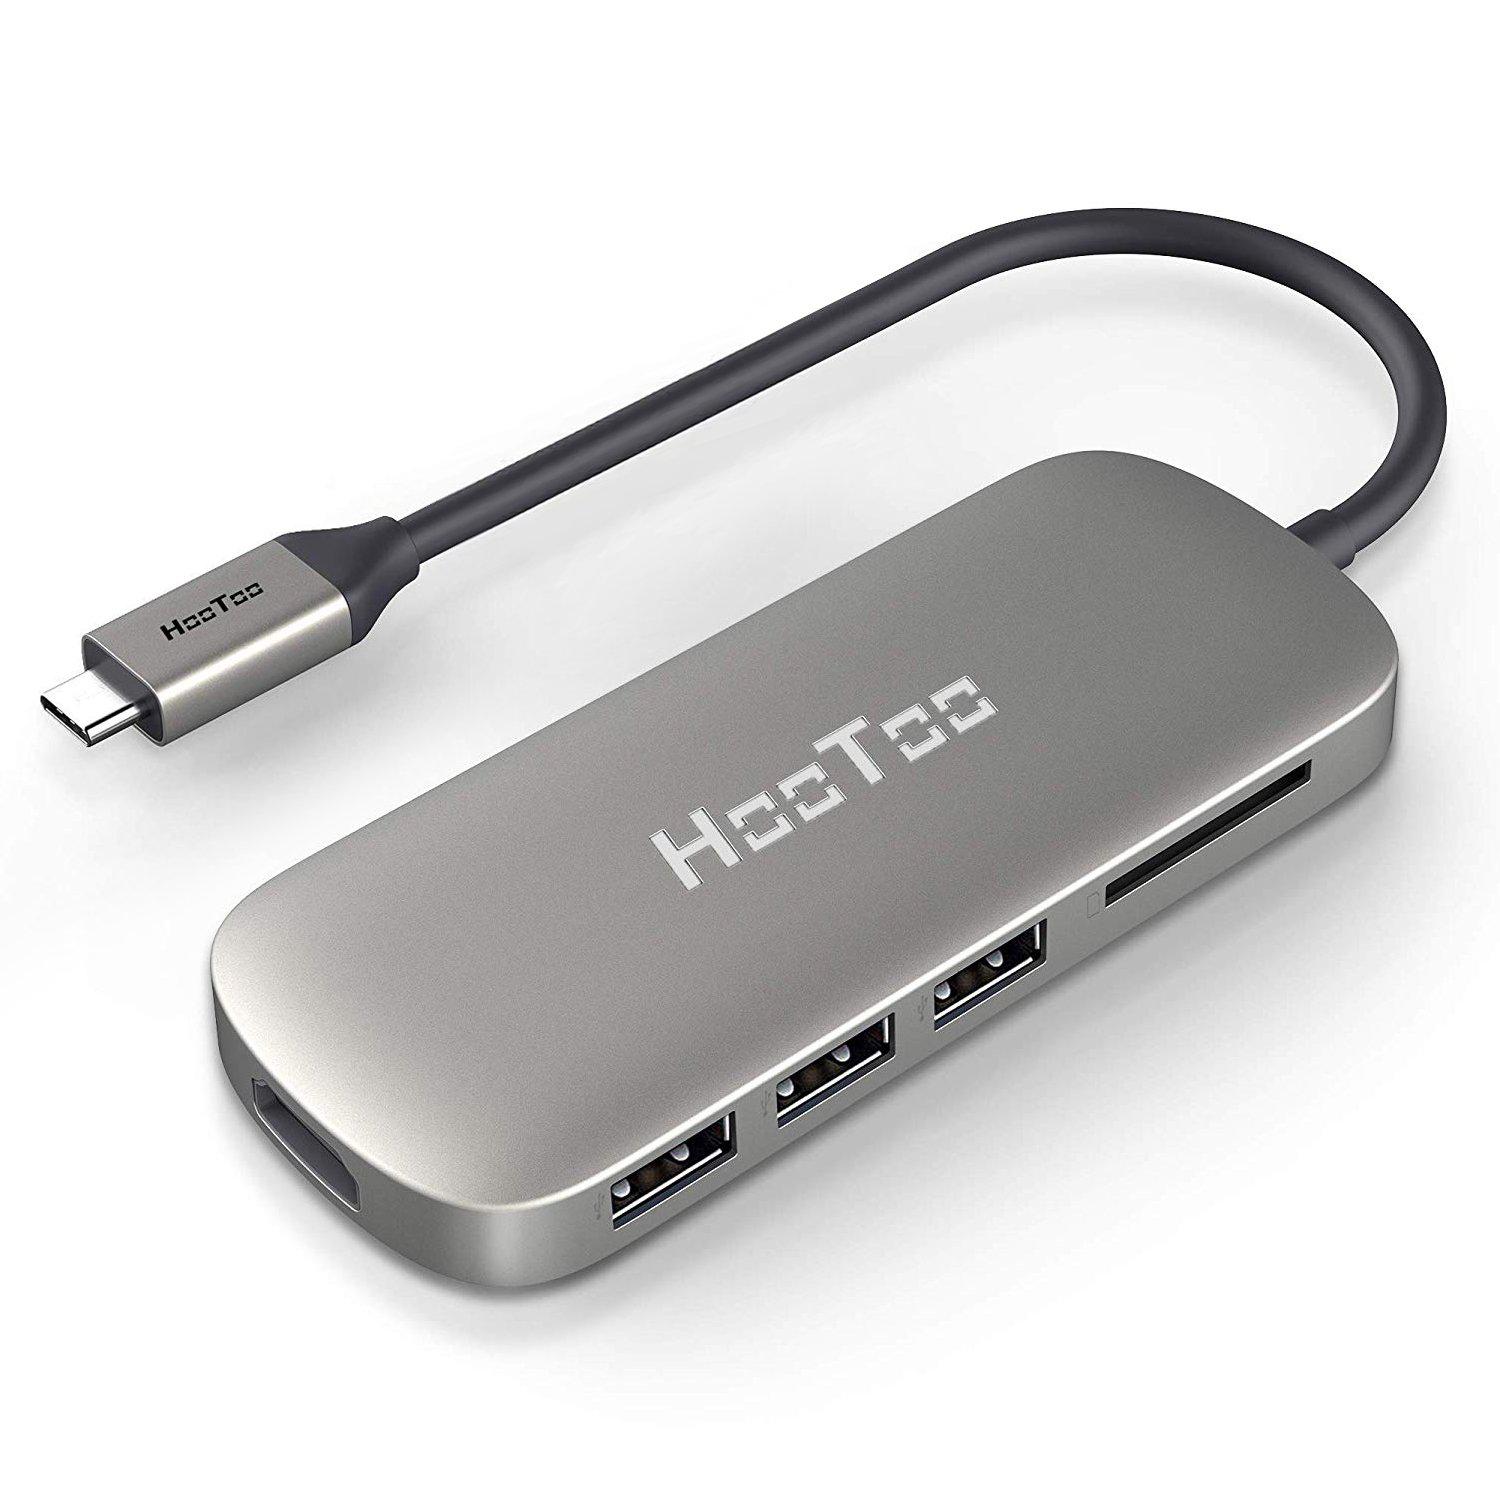 6-In-1 USB-C Hub with HDMI Port